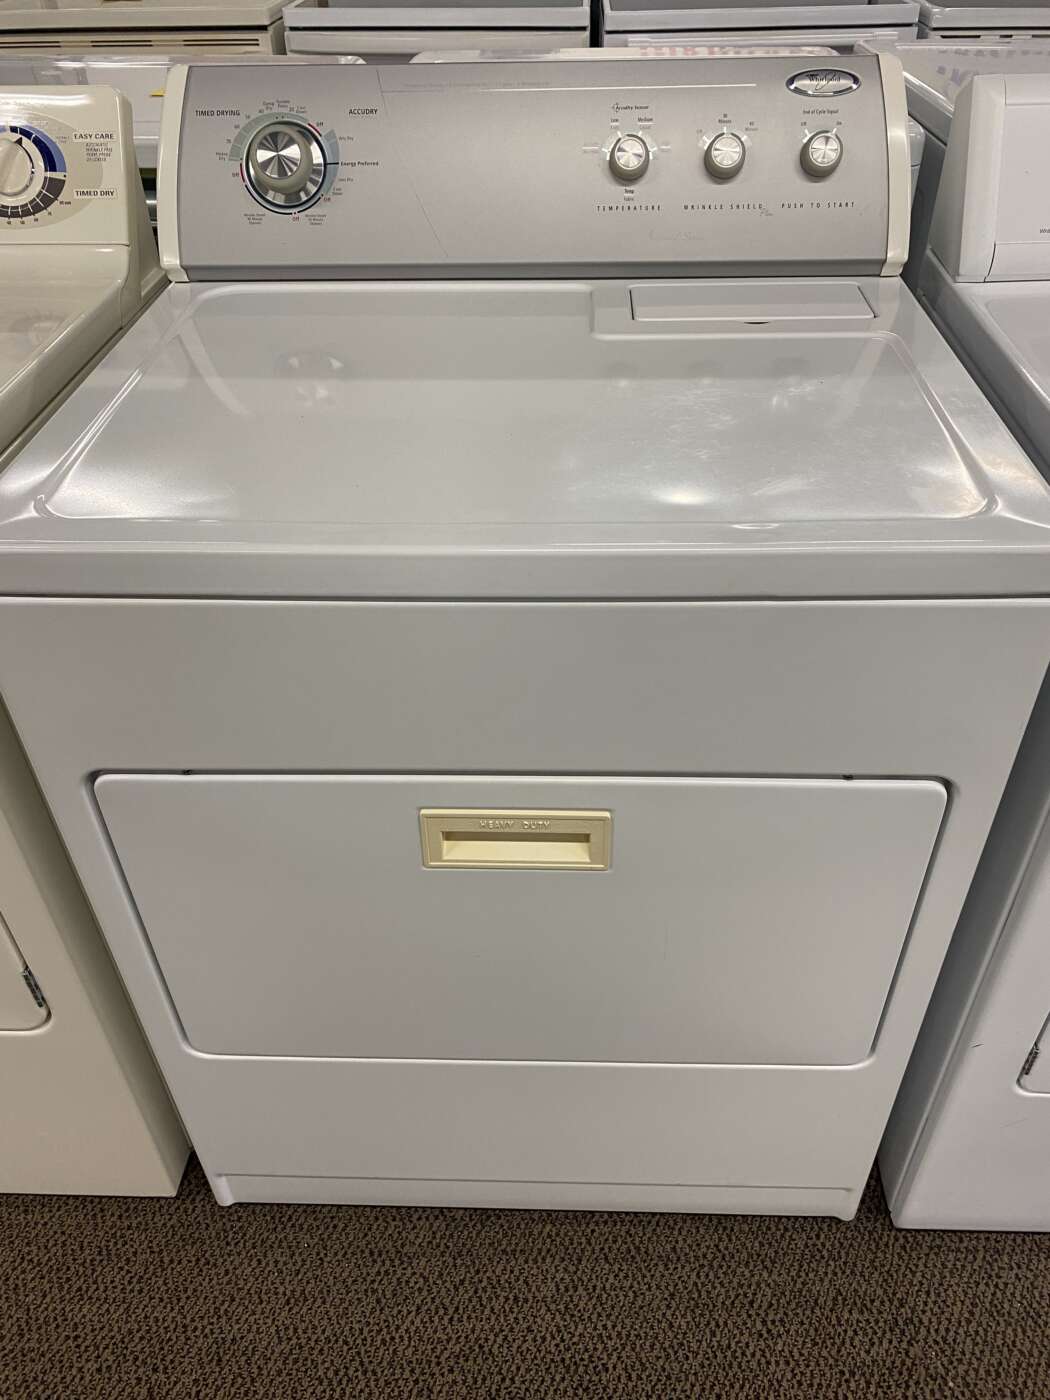 Reconditioned WHIRLPOOL Dryer